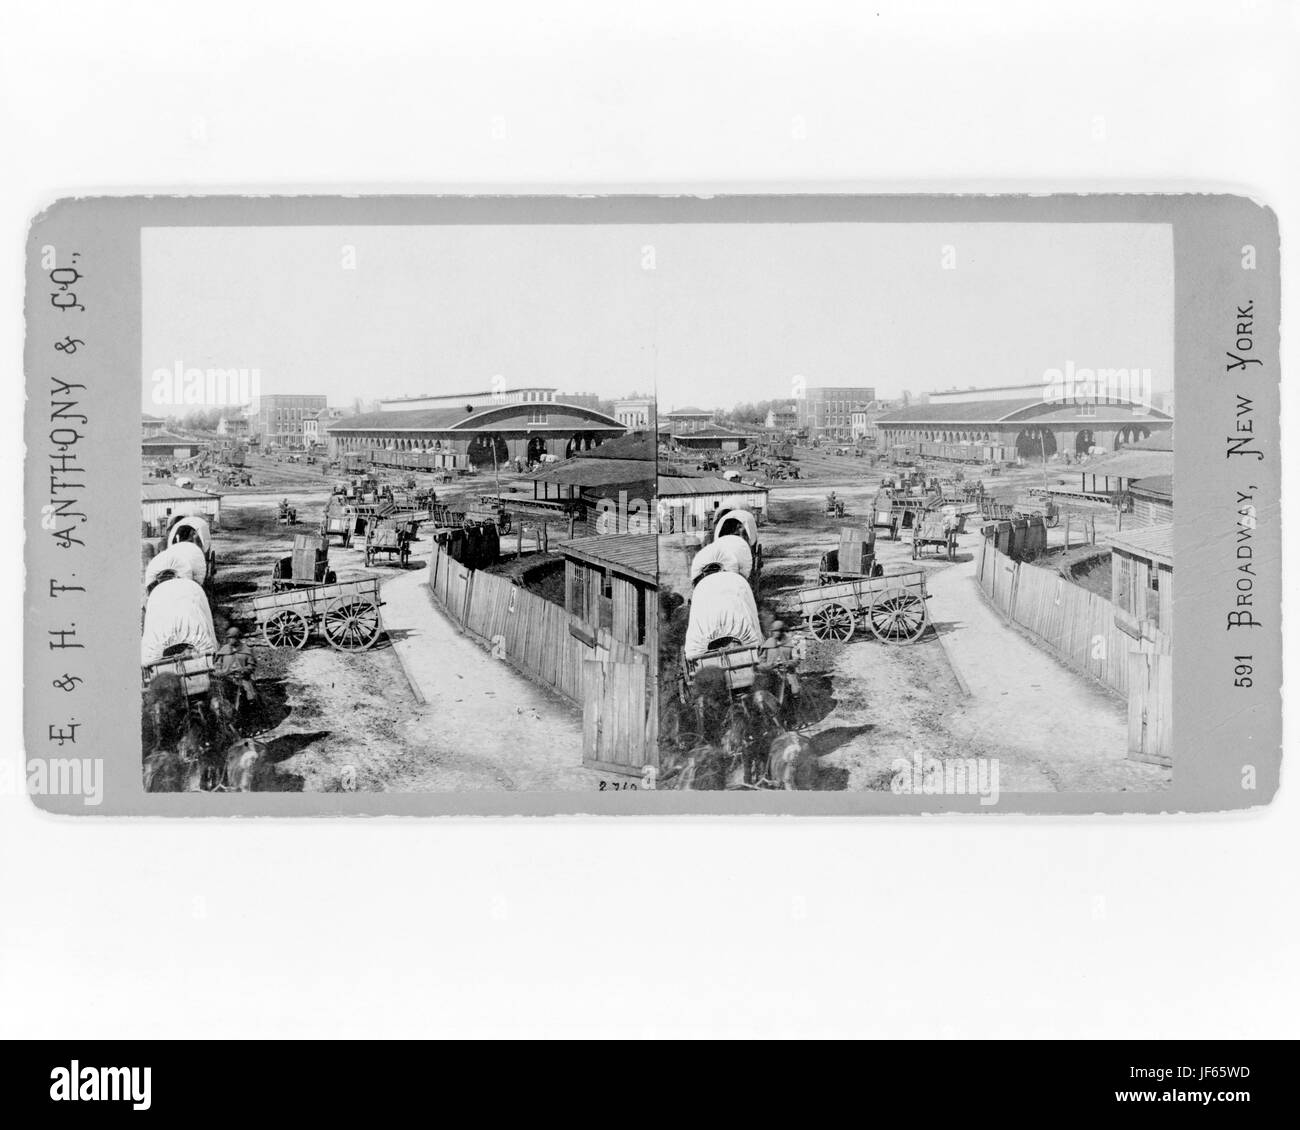 View of railroad depot and surroundings, Atlanta, Ga.  Railroad depot in background, covered wagons in foreground.1 photographic print on stereo card : stereograph. Created November 1864, Barnard, George N., 1819-1902, photographer. Stock Photo